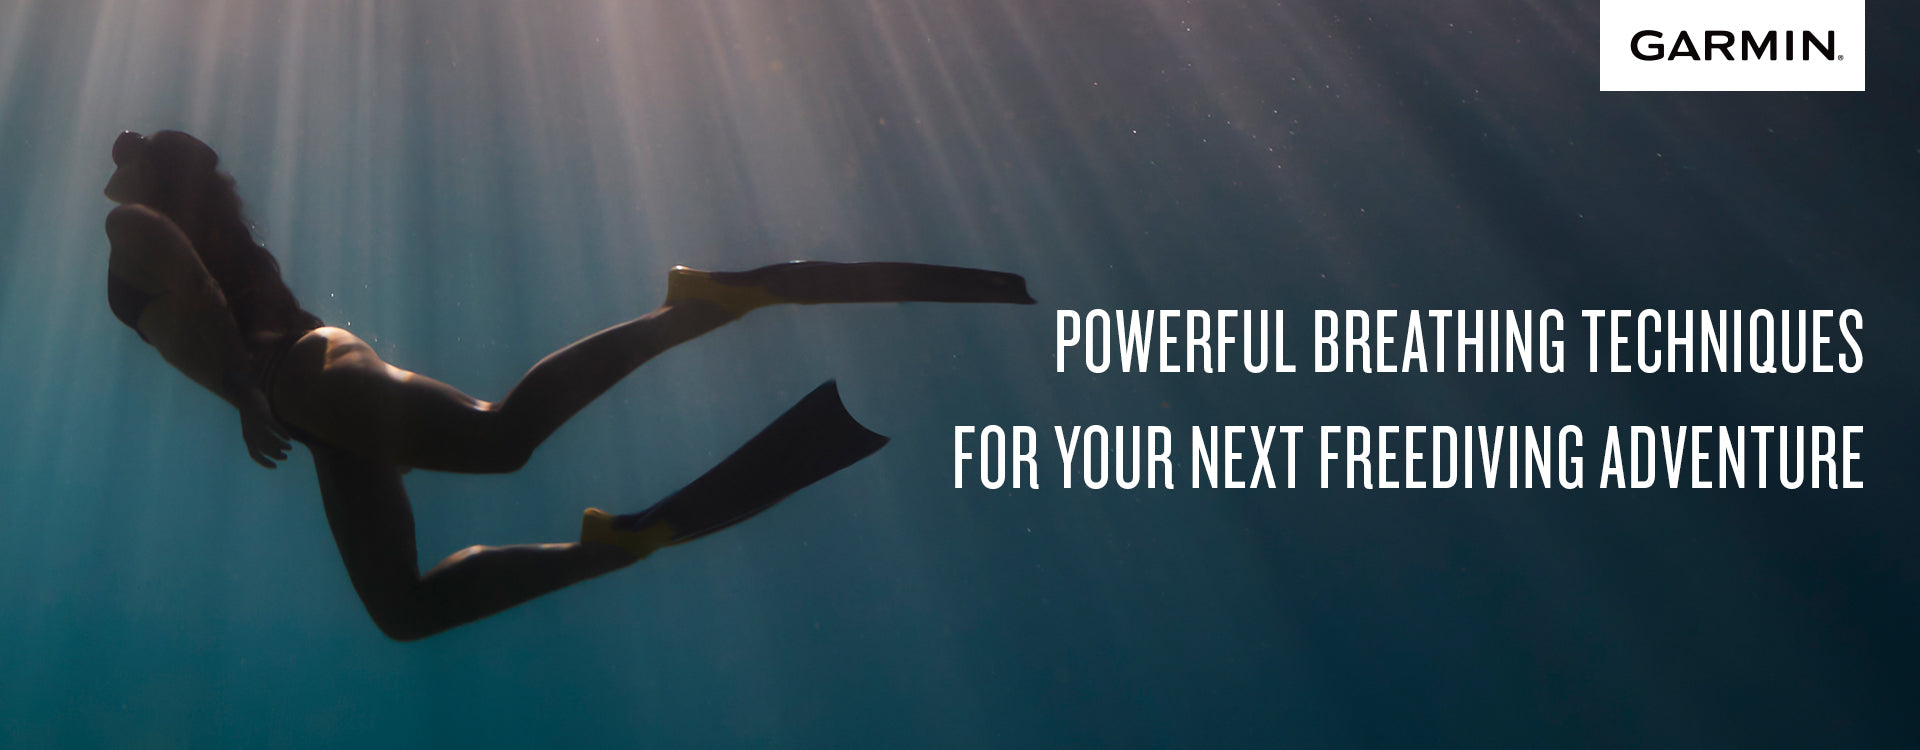 Powerful Breathing Techniques for Your Next Freediving Adventure